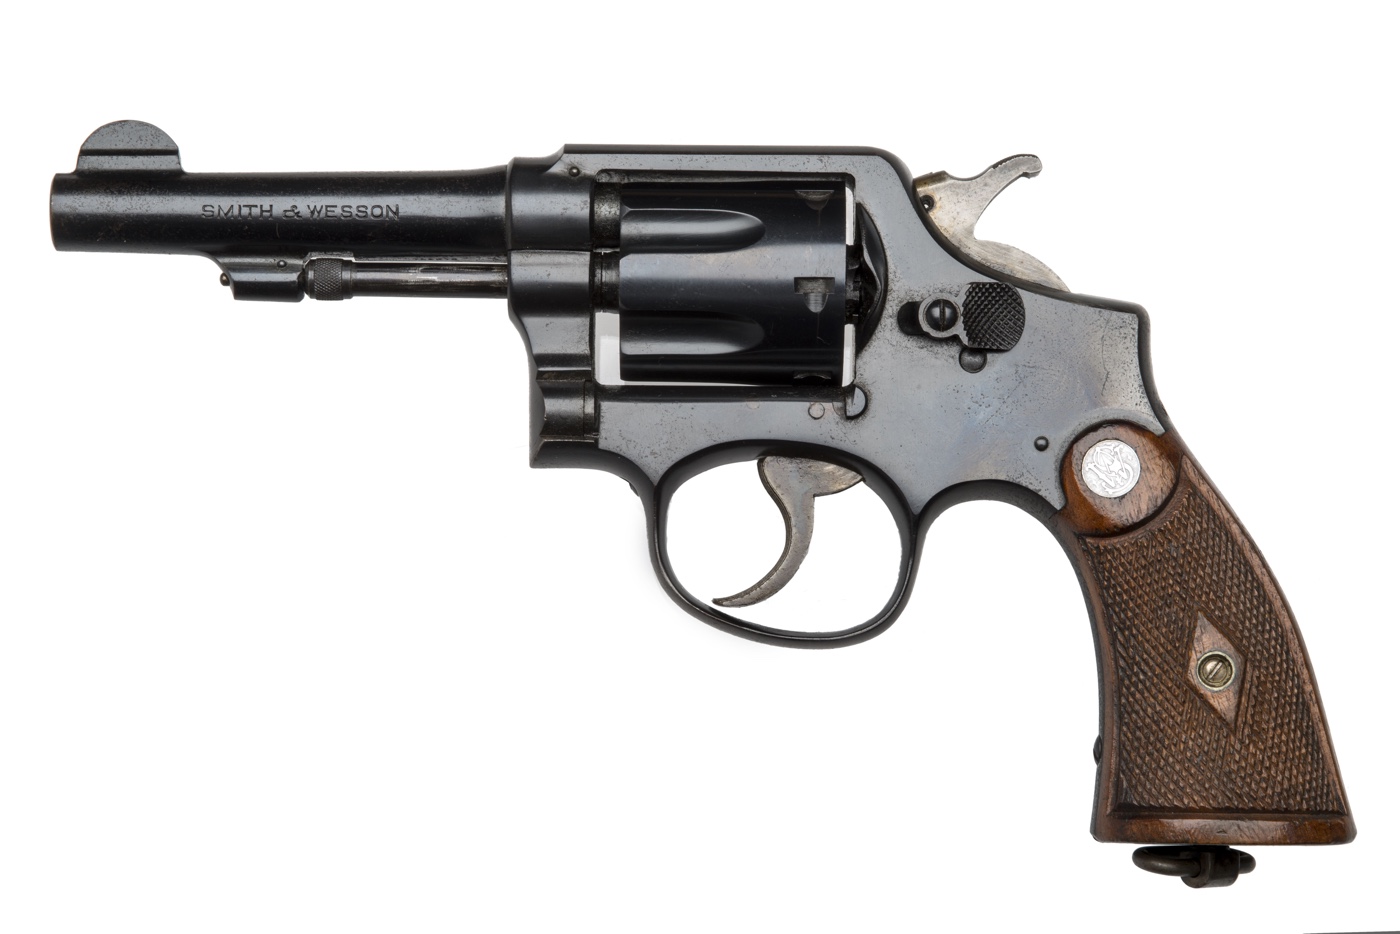 8a. The Smith & Wesson .38 revolver used by Ruth Ellis to murder David Blakely, 1955 ∏ Museum of London